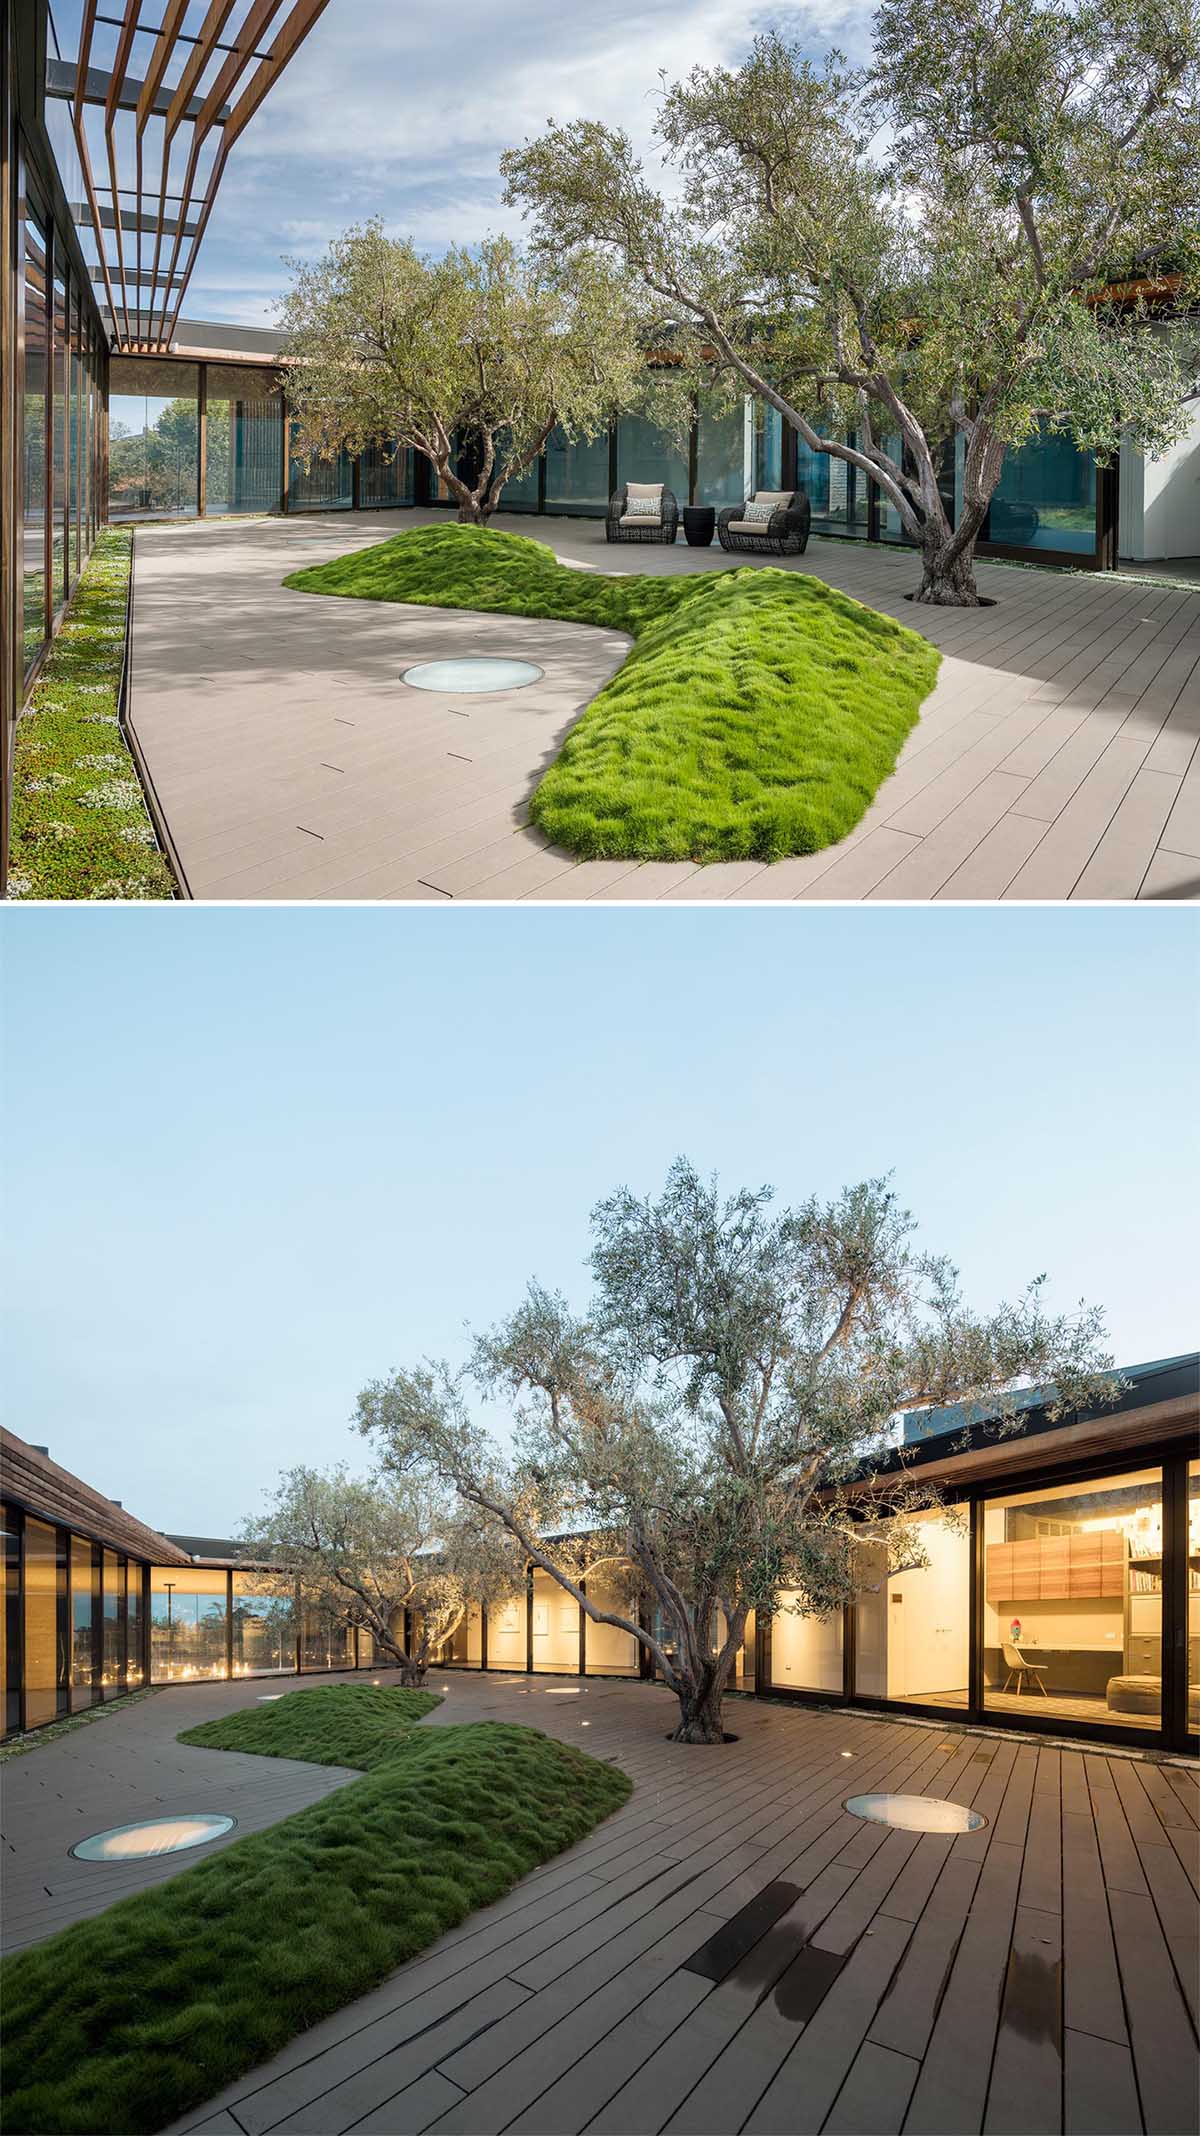 The interior of this modern home includes  a terrace that's lined around the edges with low ground cover, while the middle of the terrace features a raised grassy mound, inground lighting, a pair of trees, and a sitting area.